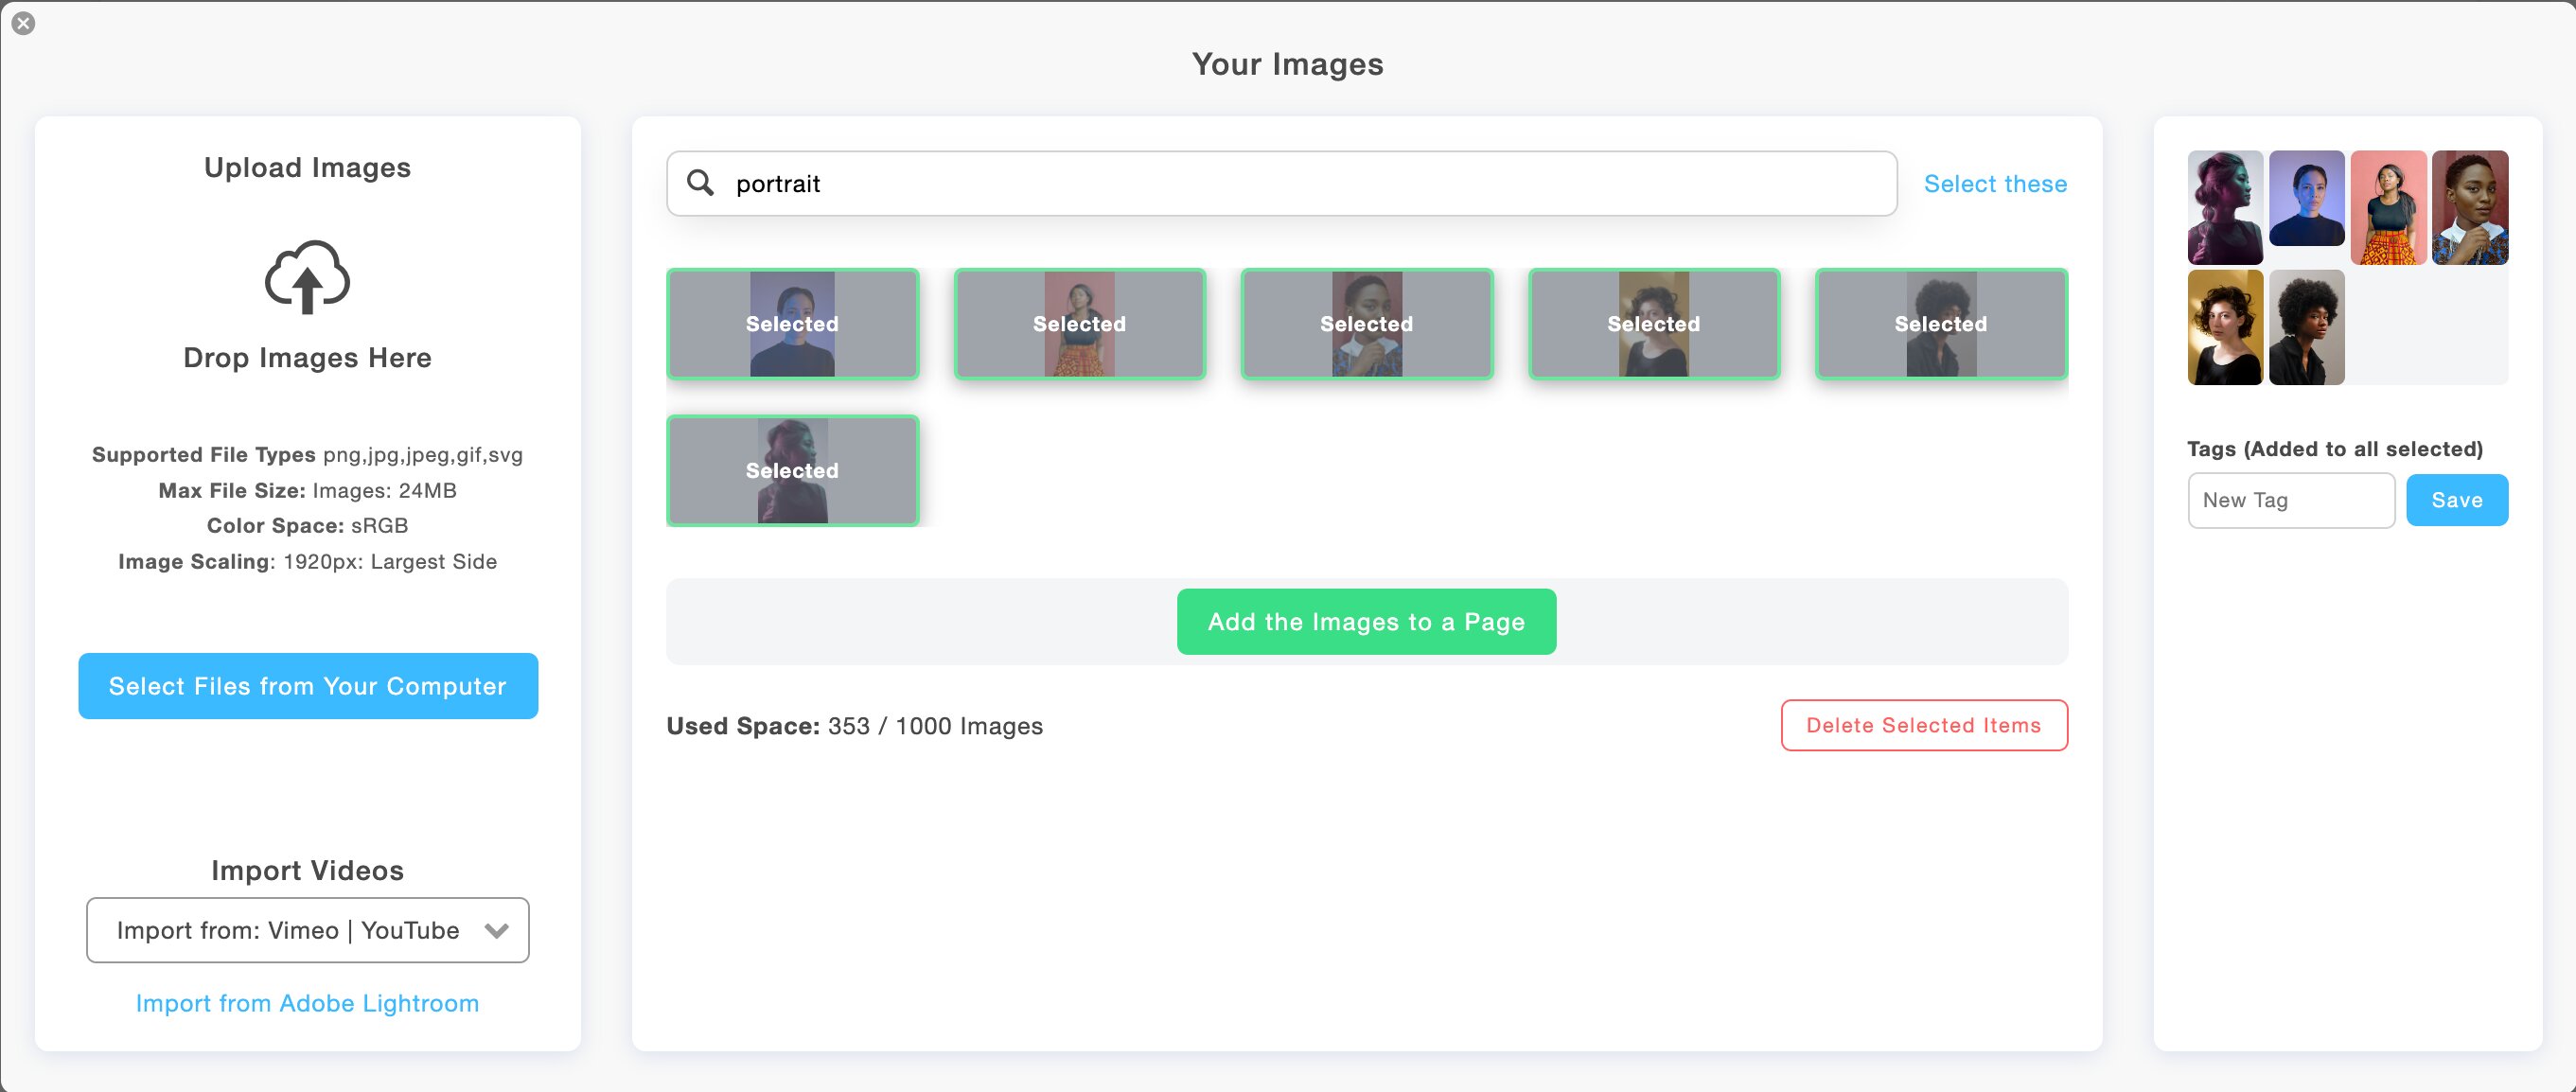 Search by tag images in the Image Library